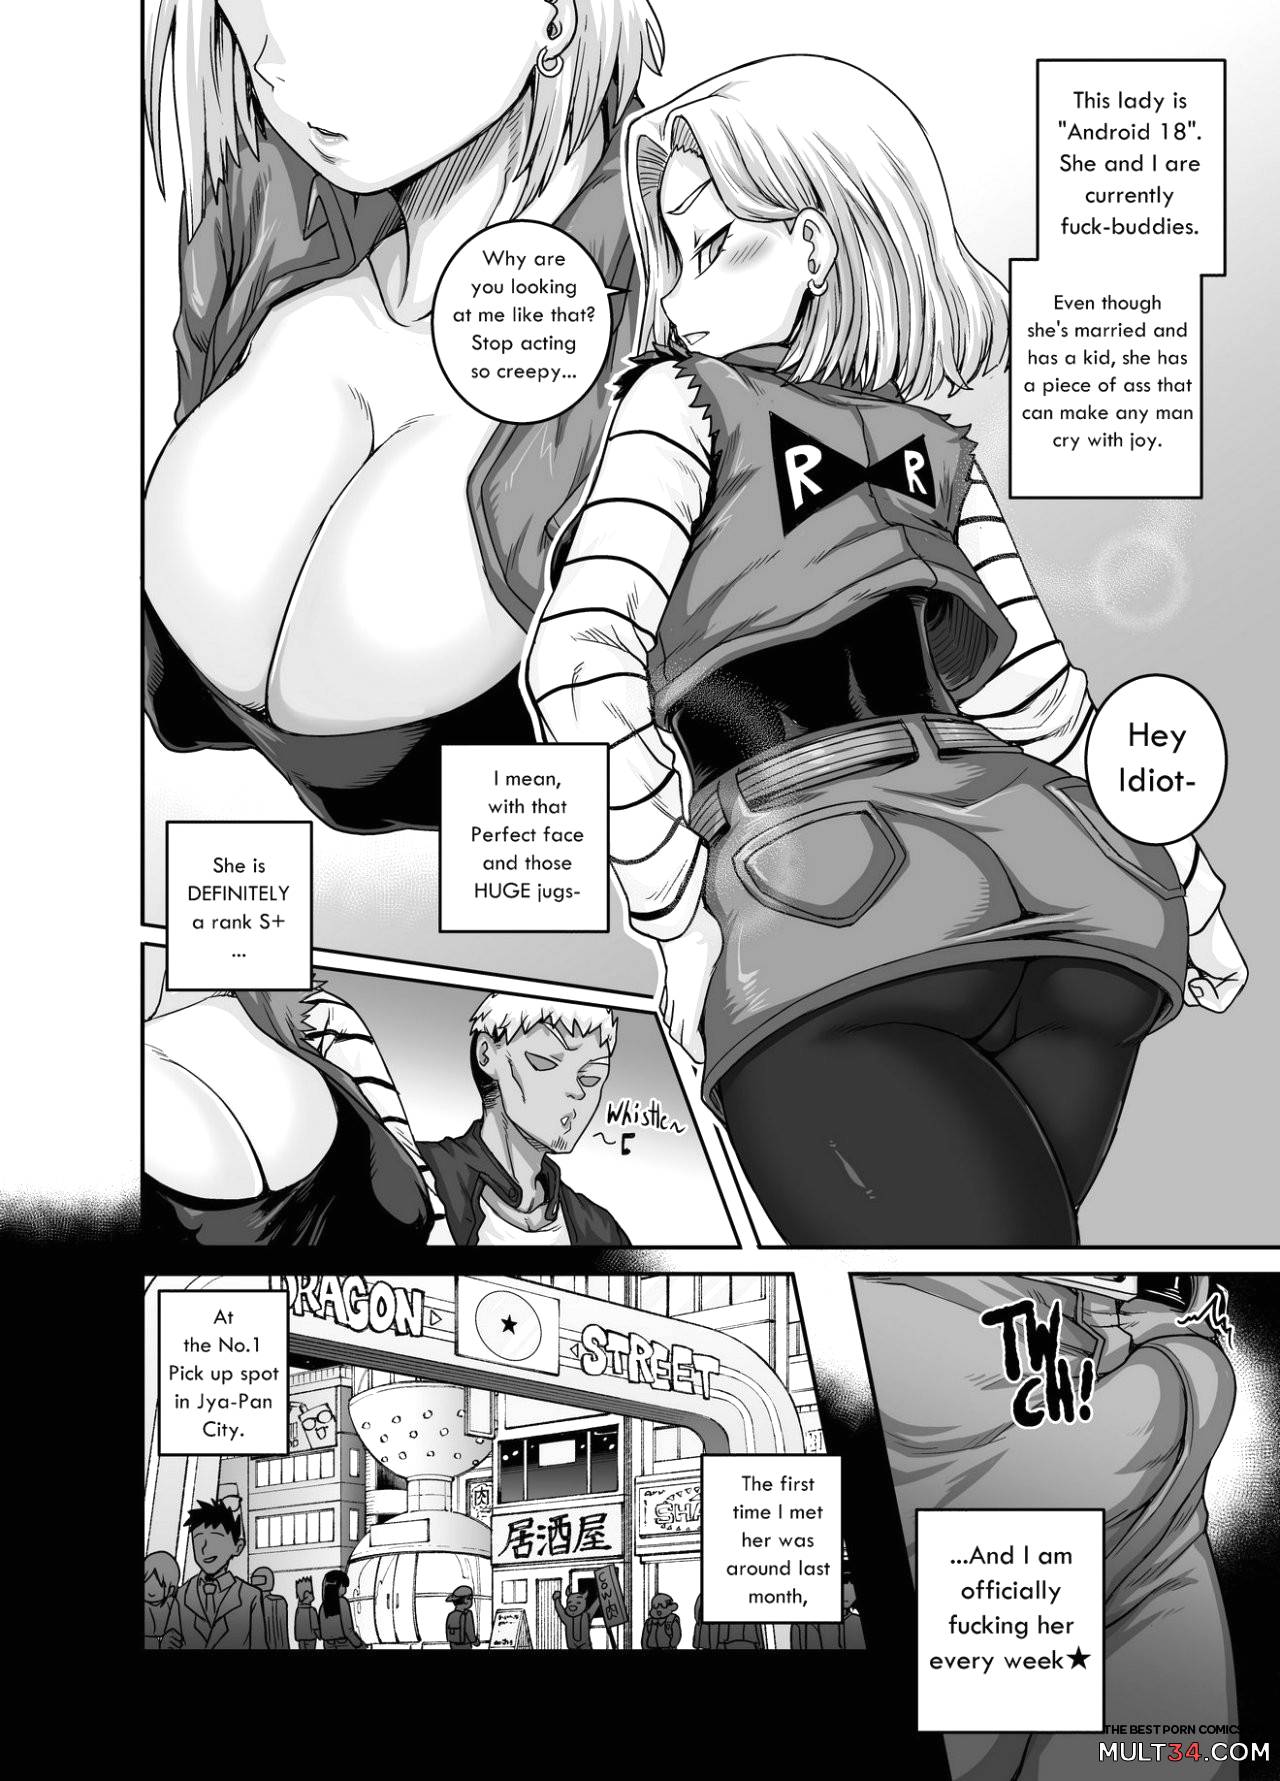 The Lady Android who Lost to Lust page 4